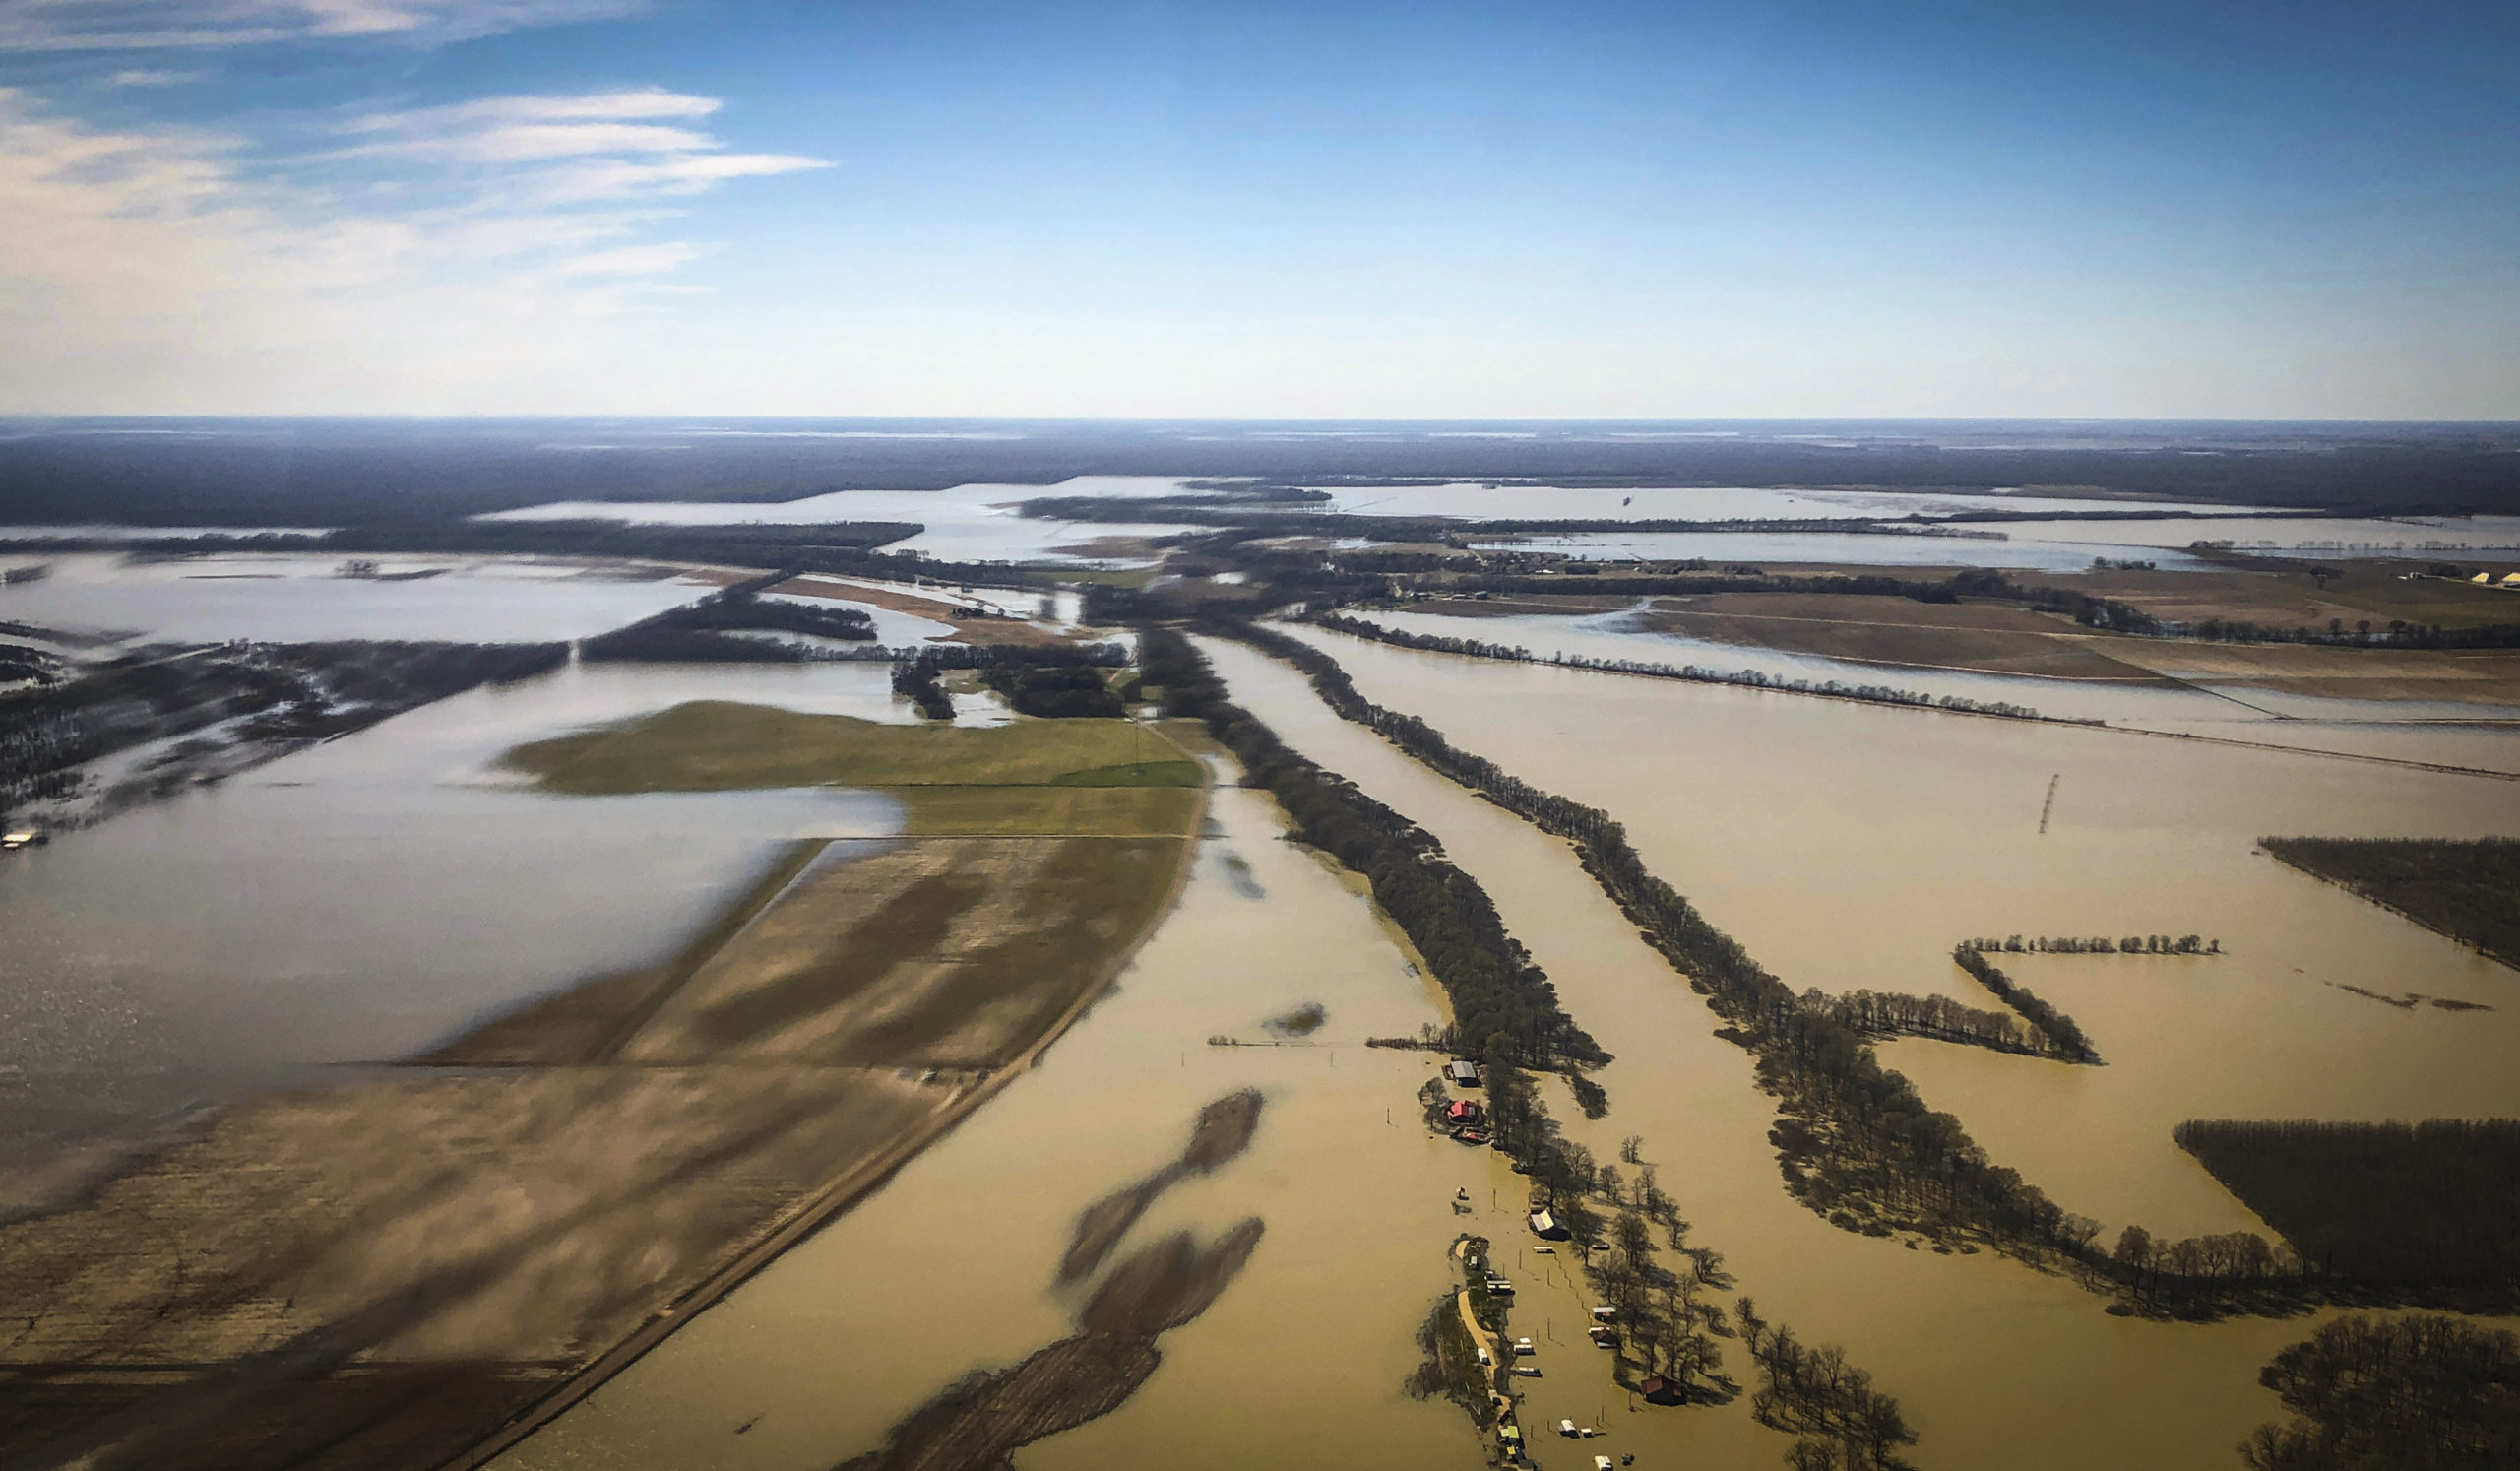 Backwater flooding covers stretches of farm lands near Yazoo City, Miss., Sunday, March 17, 2019, as seen in this aerial photograph. Various communities in the Mississippi Delta are combatting both Mississippi River flooding and backwater flooding that are affecting homes, businesses and farm lands. (AP Photo/Holbrook Mohr)